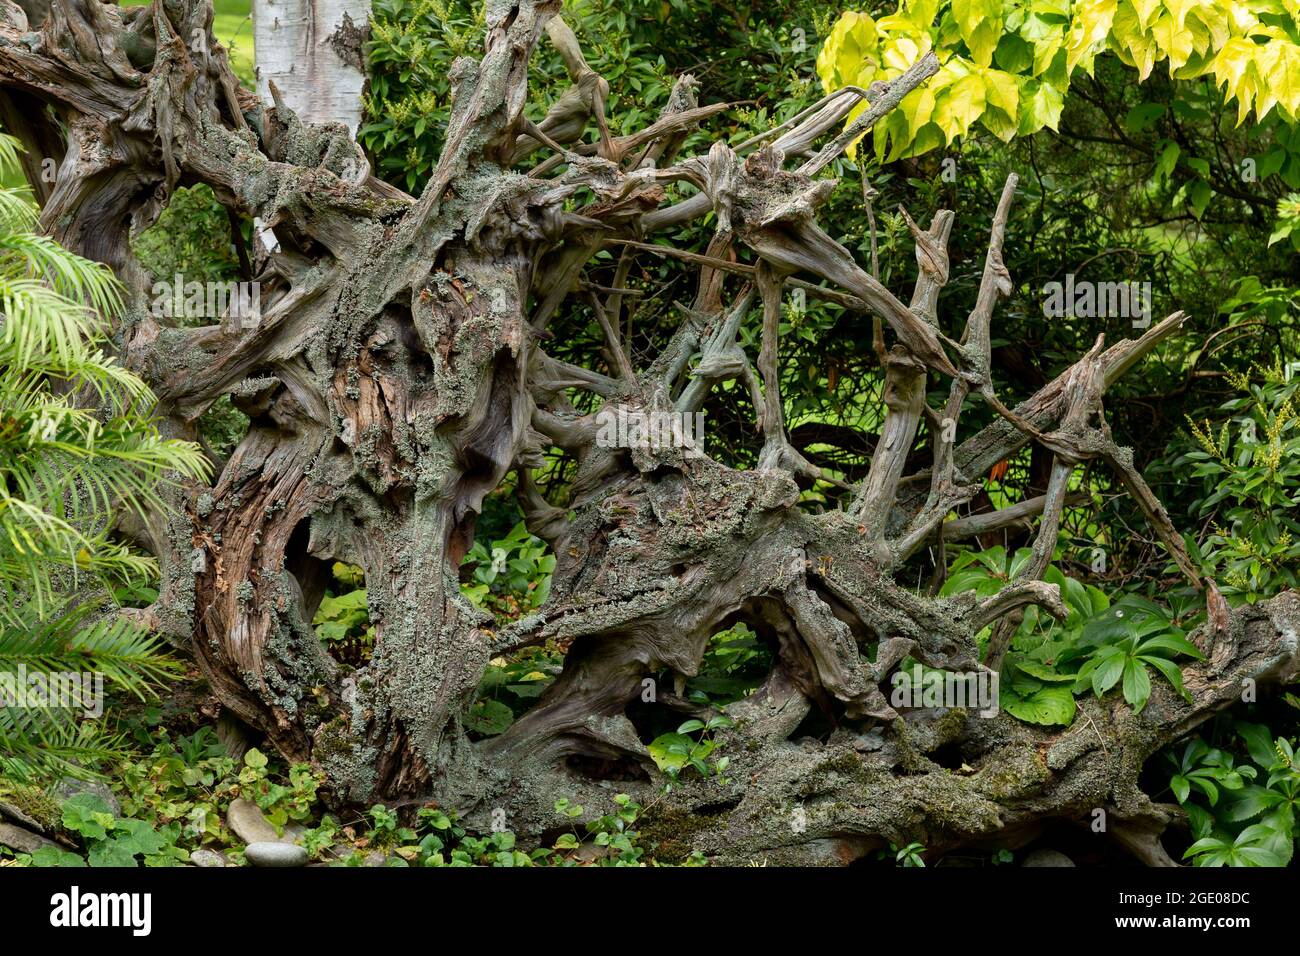 A large piece of driftwood as a garden feature. Stock Photo